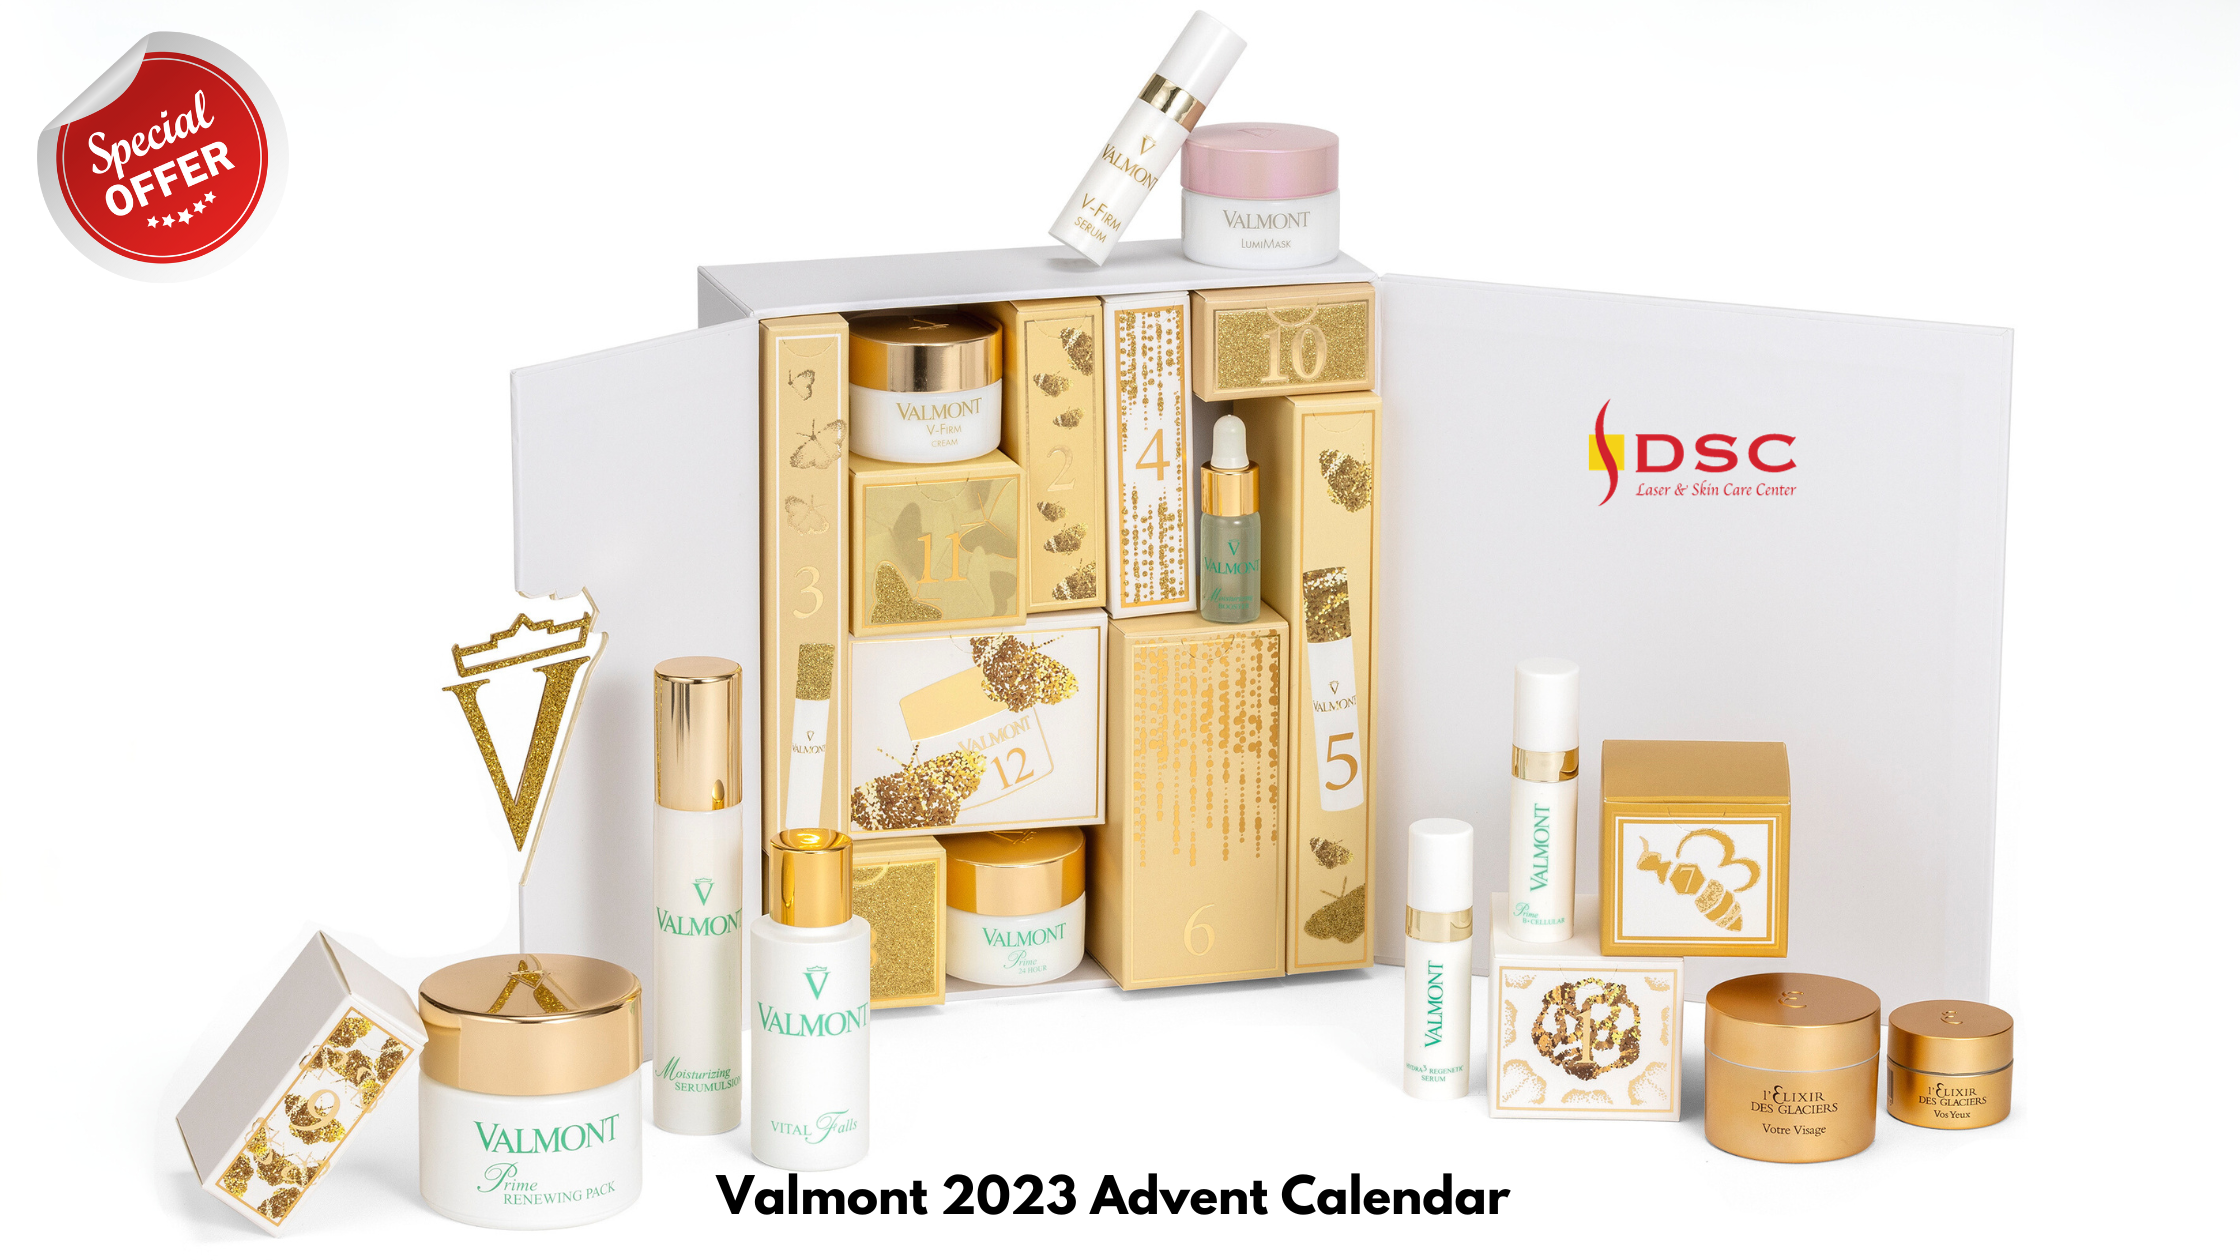 DSC Valmont 2023 Advent Calendar Winter Illuminations box opened with product contents displayed